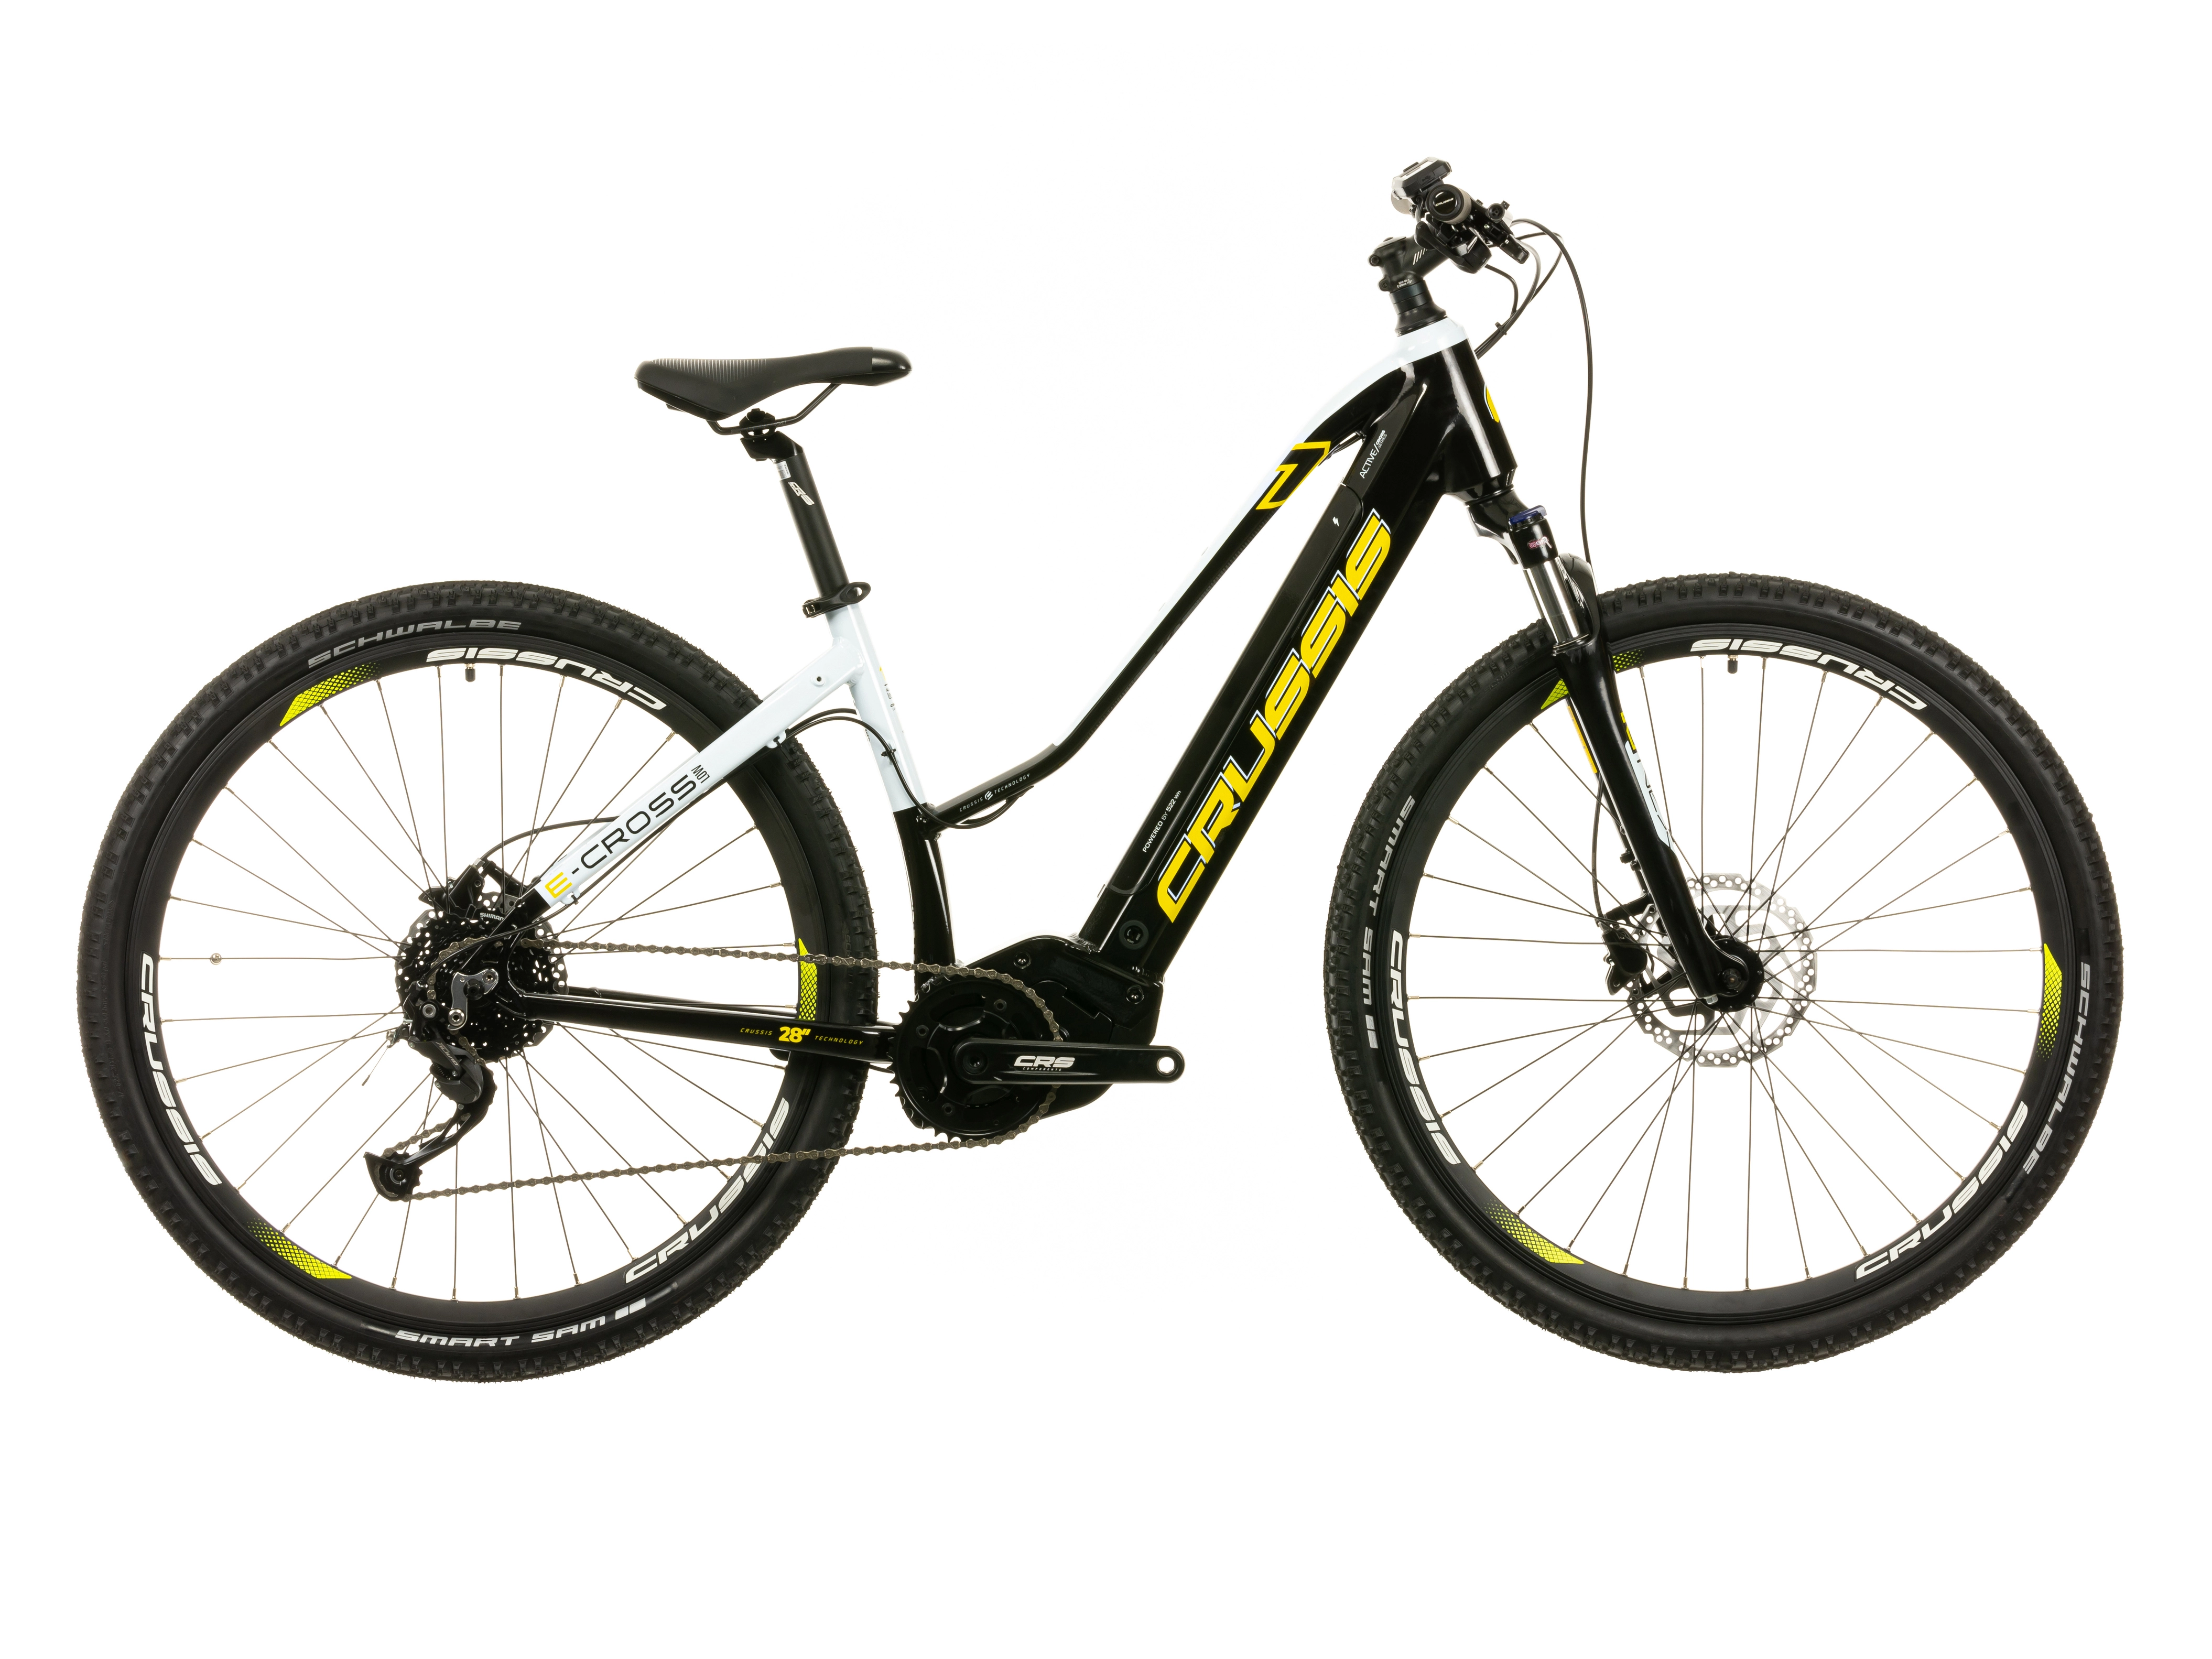 Crussis e-Cross low 7.9